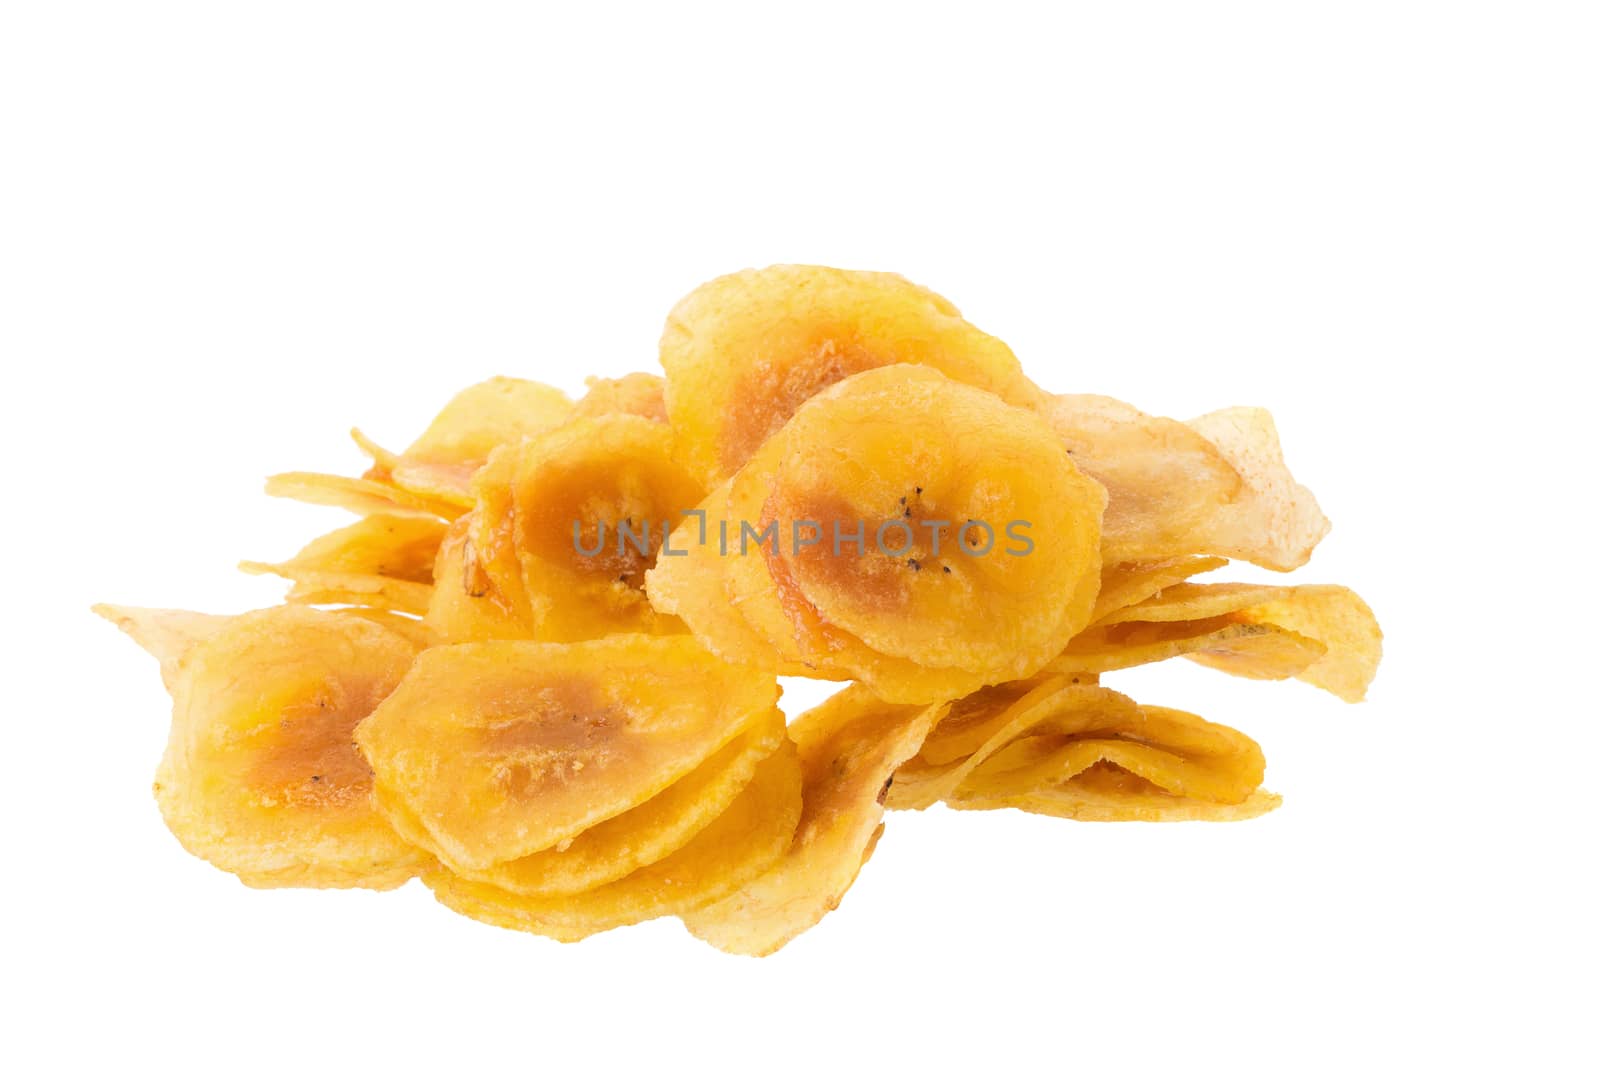 Dried banana chips. Yellow deep fried slices of bananas Isolated by kaiskynet